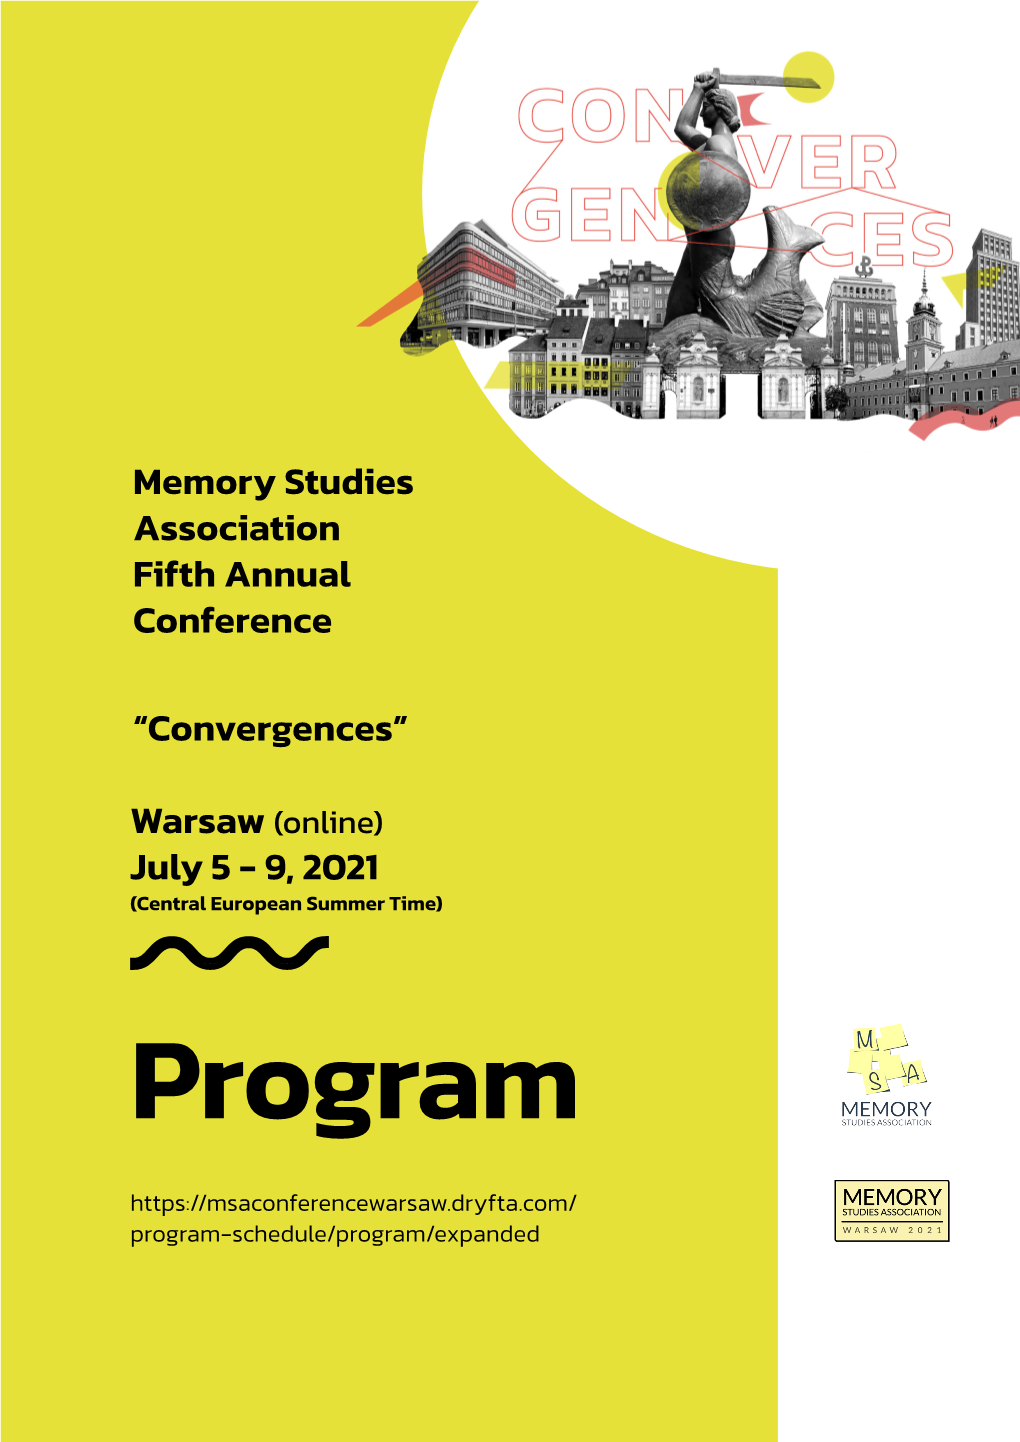 9, 2021 Memory Studies Association Fifth Annual Conference